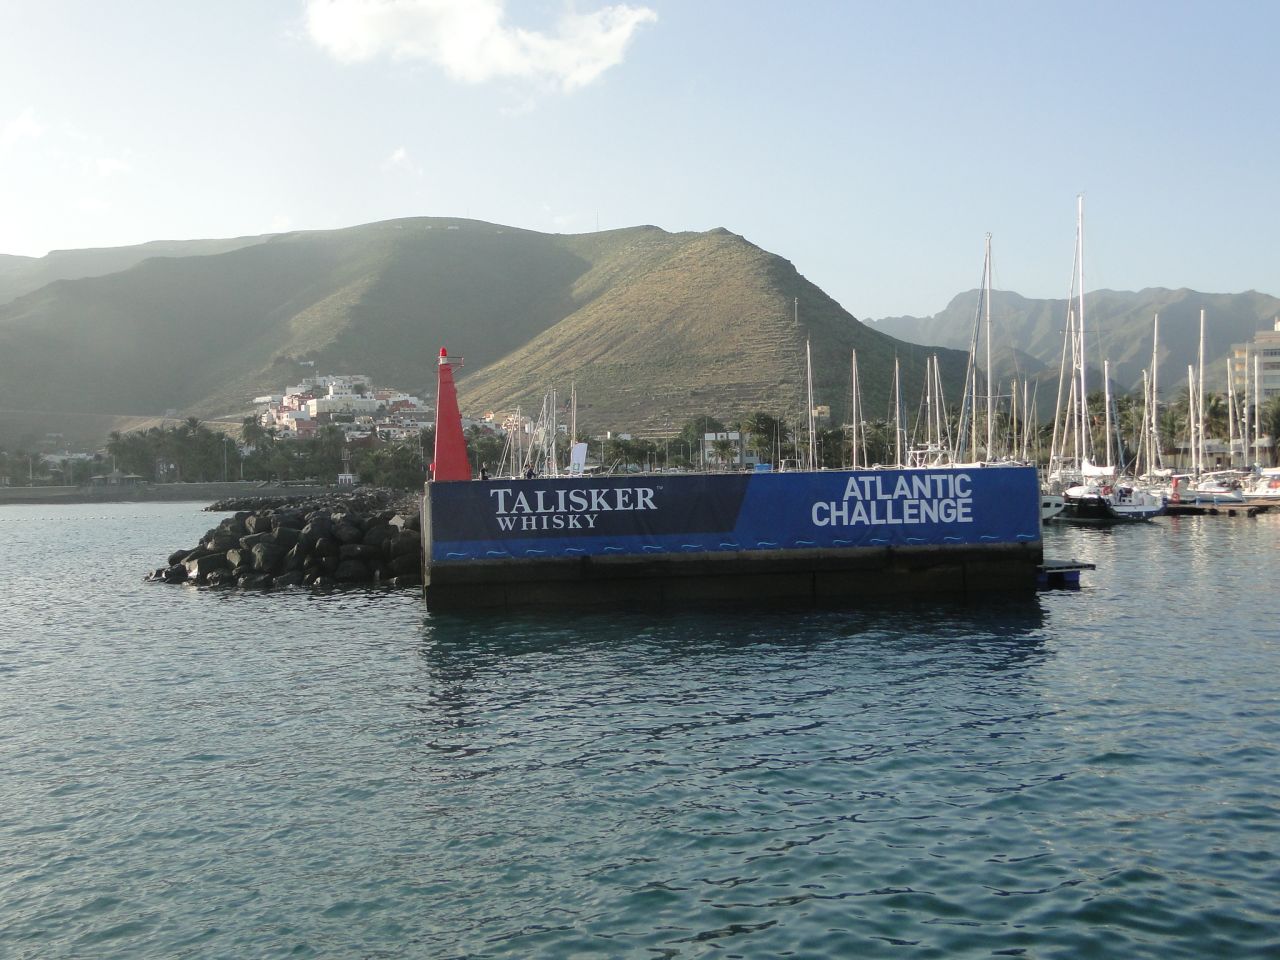 The race departure point in La Gomera. All being well, the team will arrive roughly six weeks later in Antigua in the Caribbean. It is known as the <a href="https://www.taliskerwhiskyatlanticchallenge.com/" target="_blank" target="_blank">"world's toughest rowing race."</a>